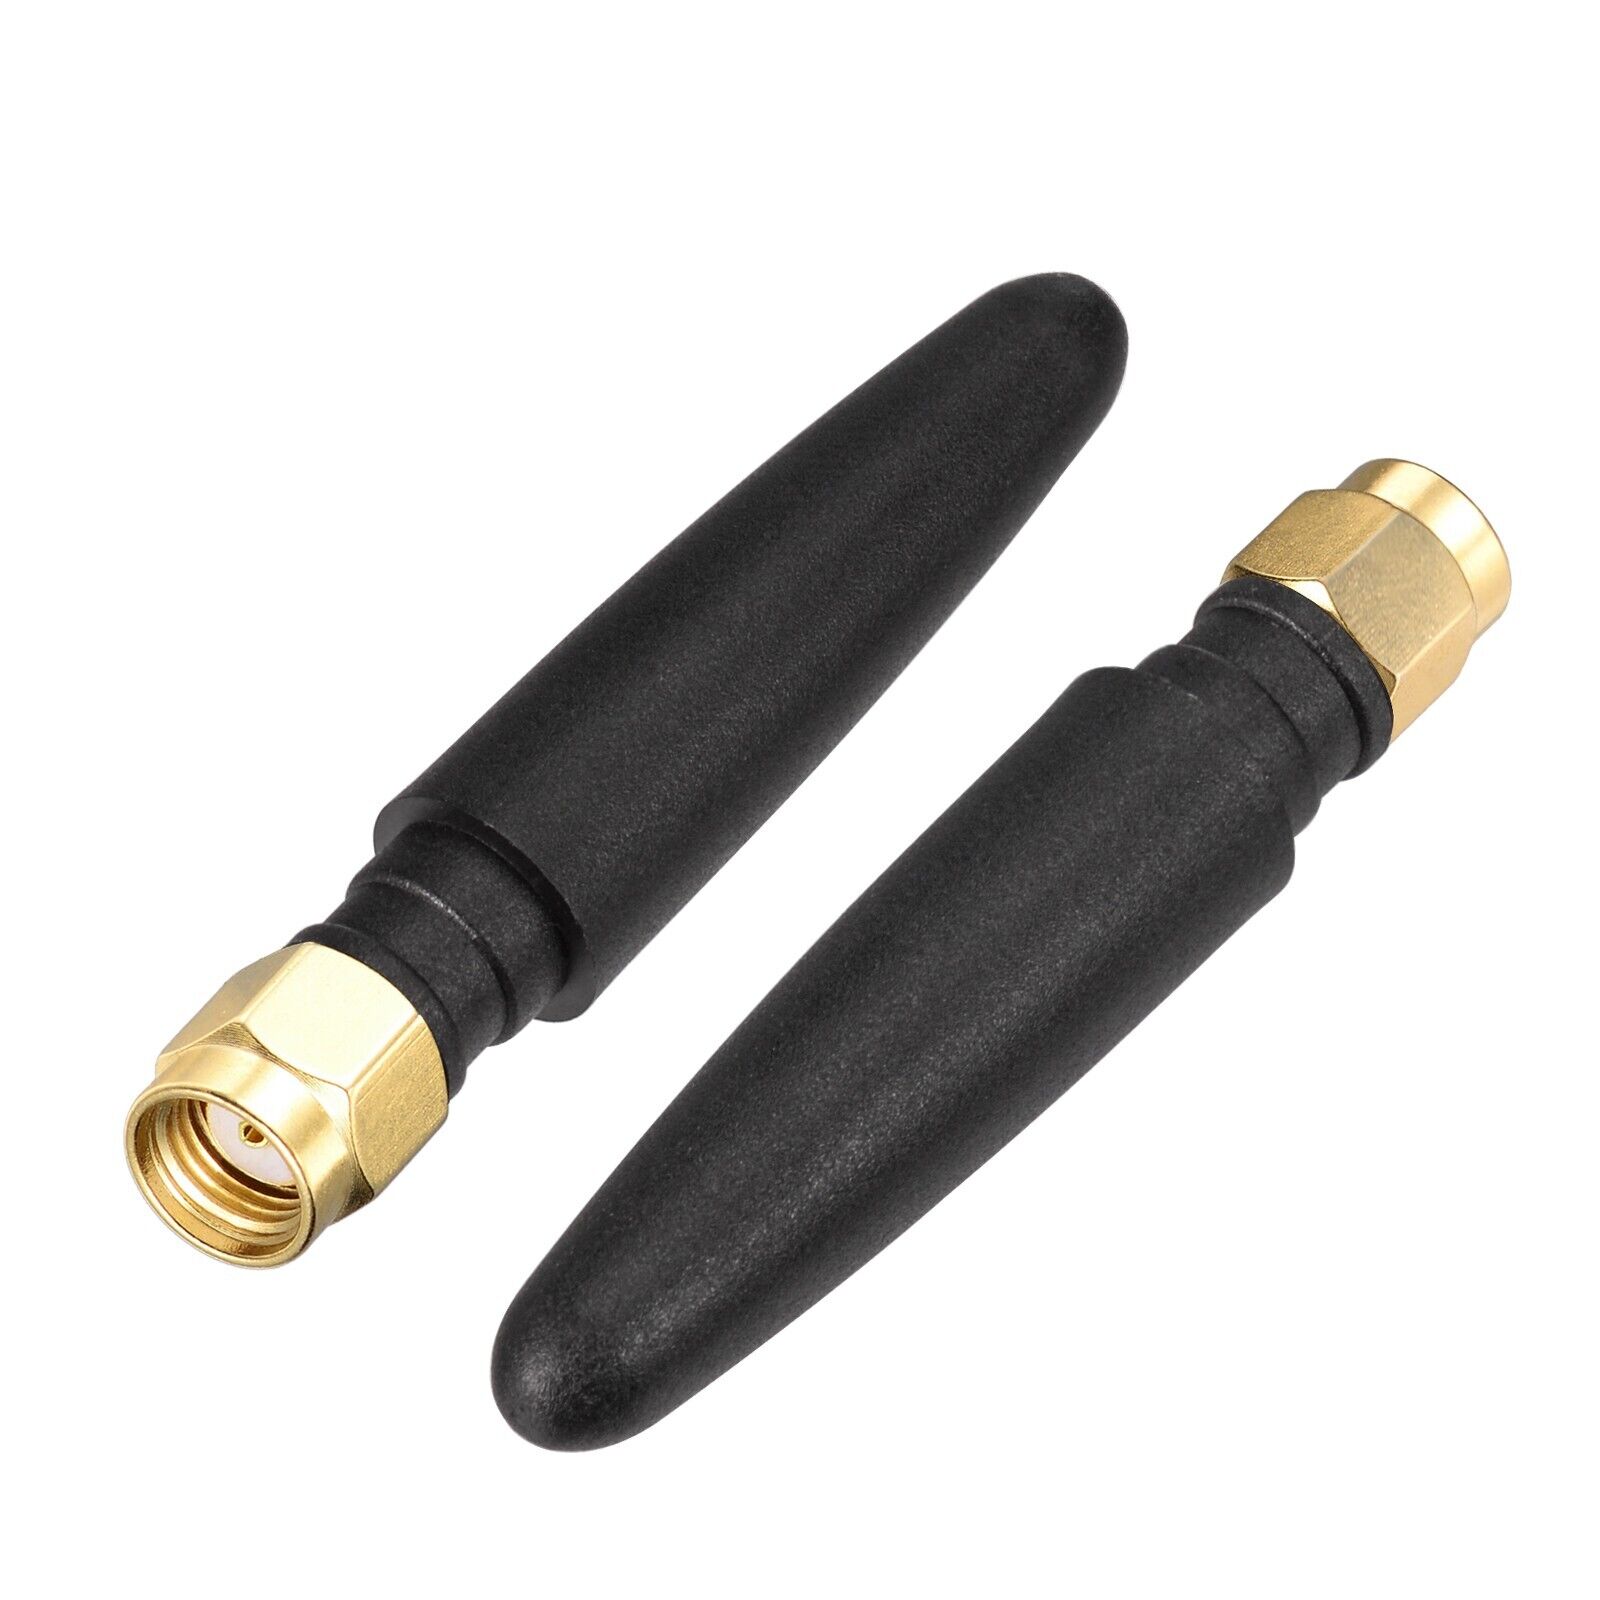 2pcs Small WiFi Antenna Dual Band RP-SMA for Wireless Router Security Camera